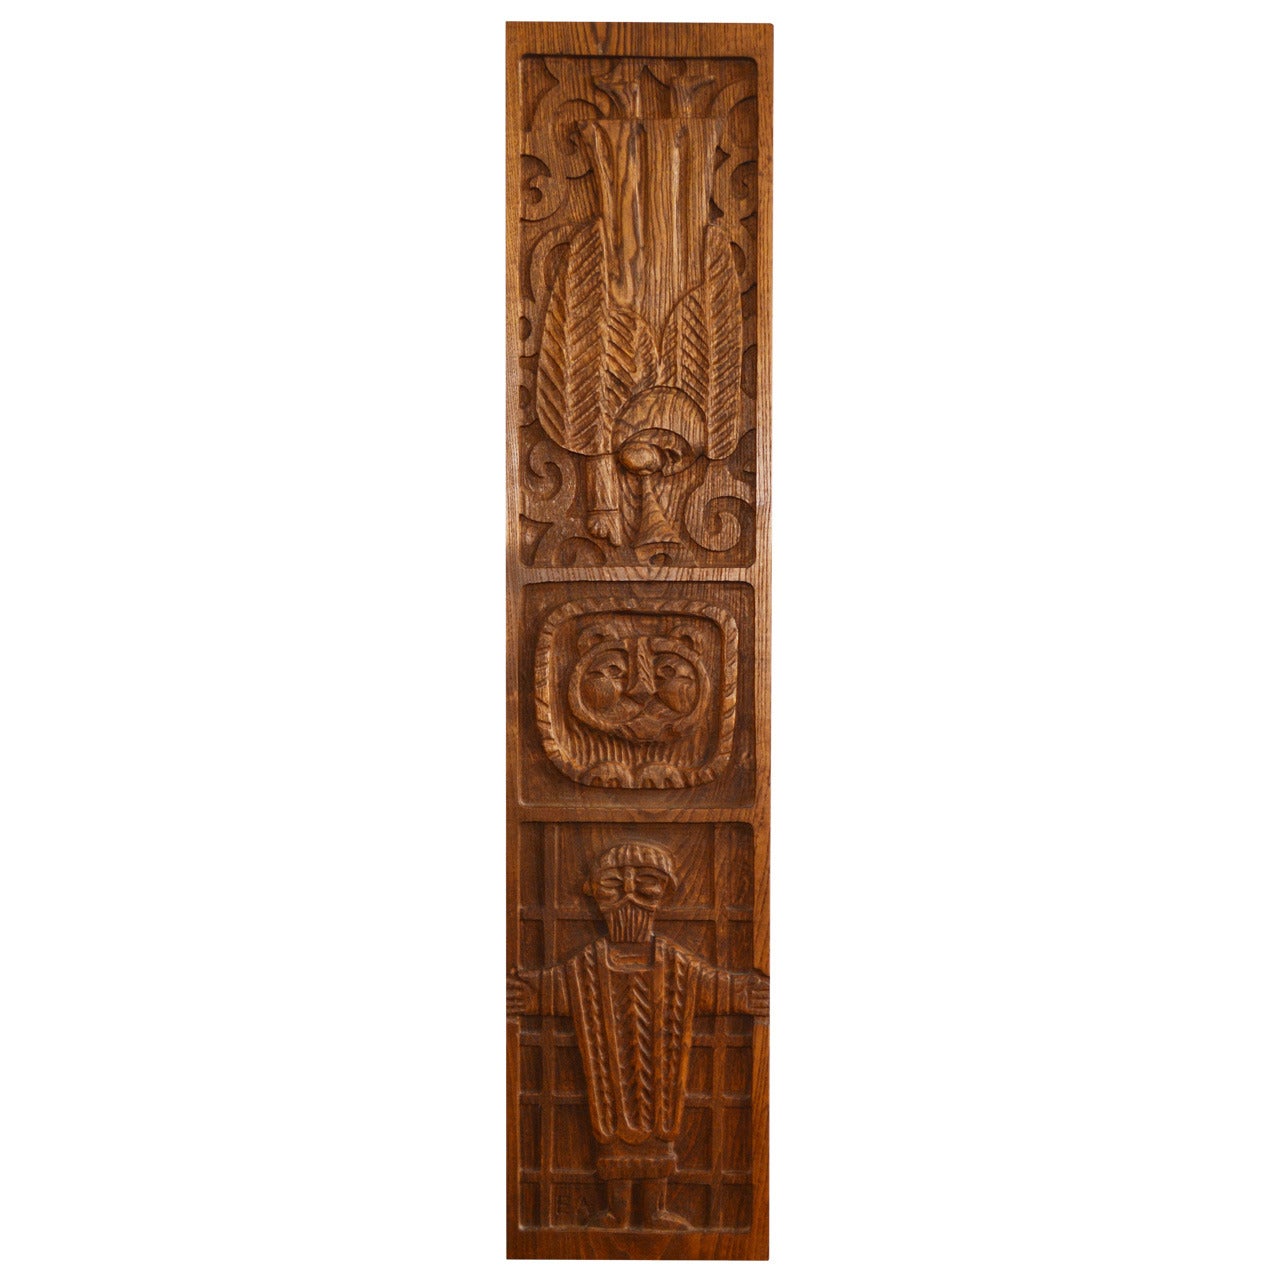 Evelyn Ackerman Carved Wood Panel for Era Industries